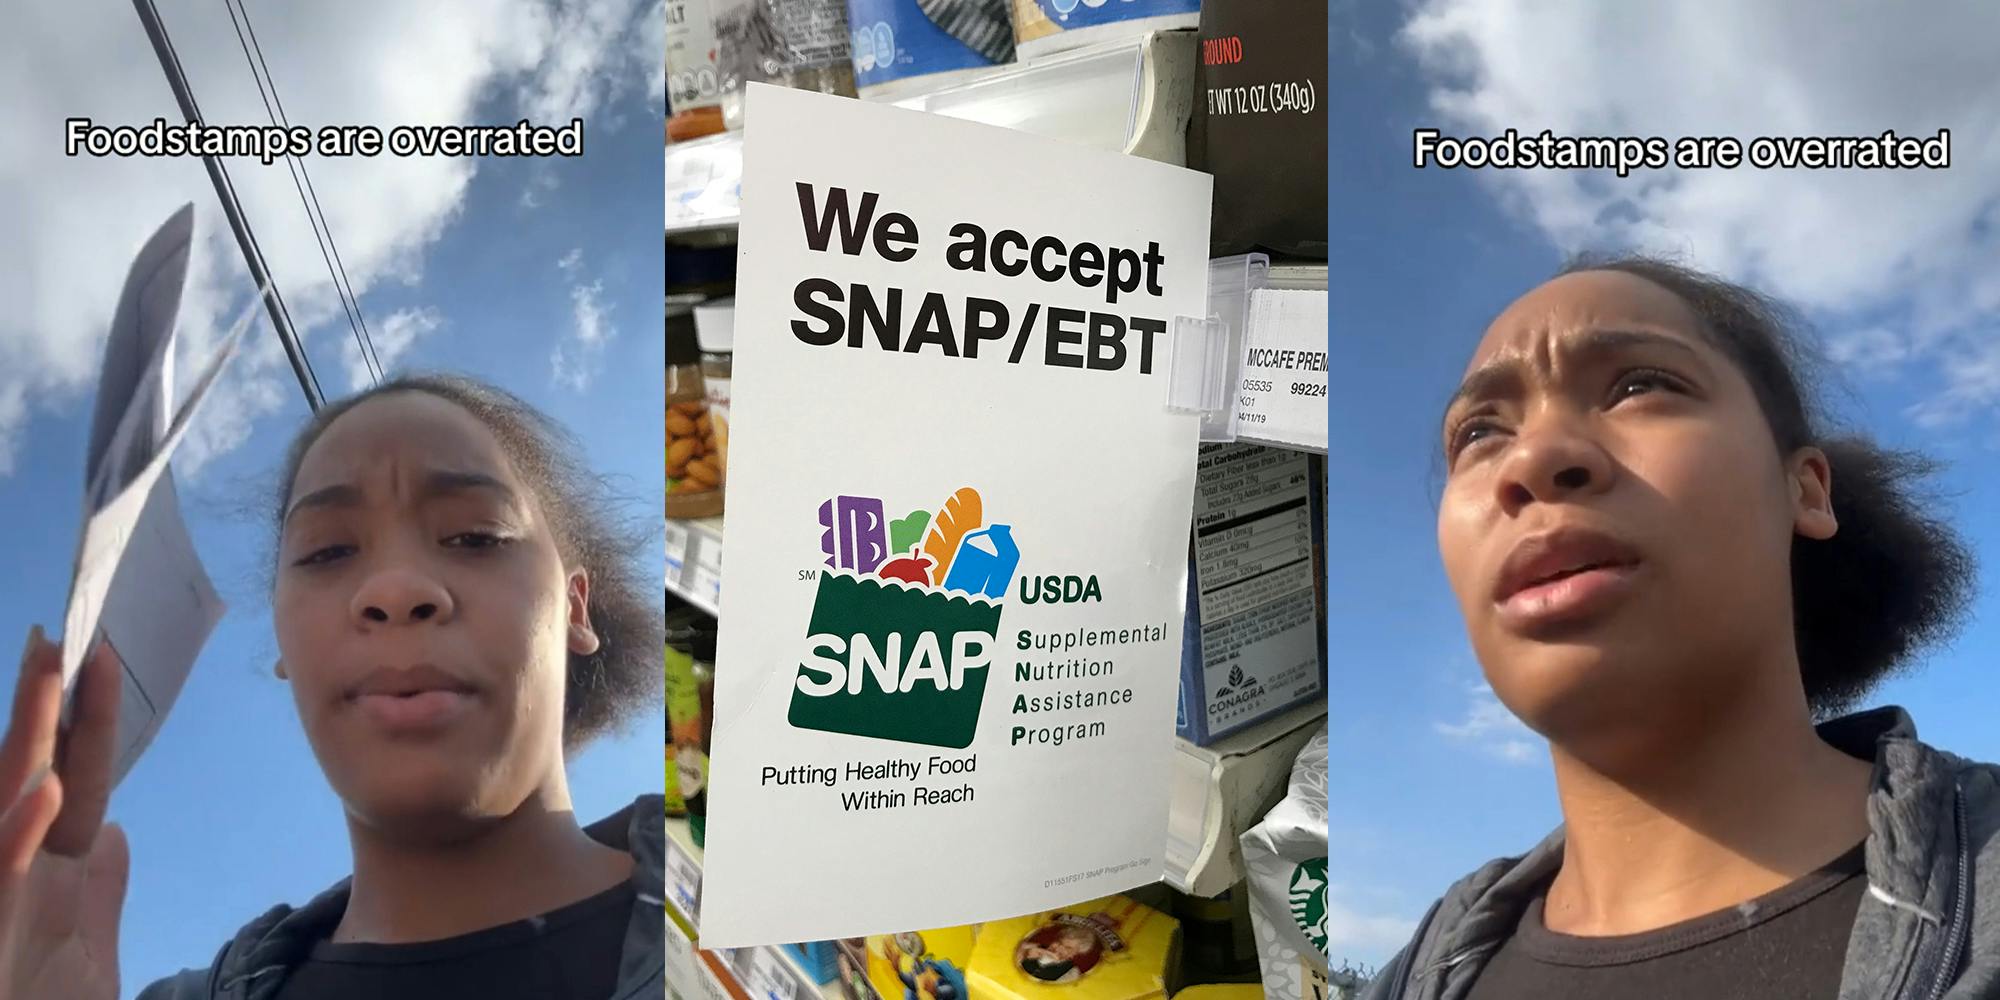 Woman critiques insane criteria for food stamps